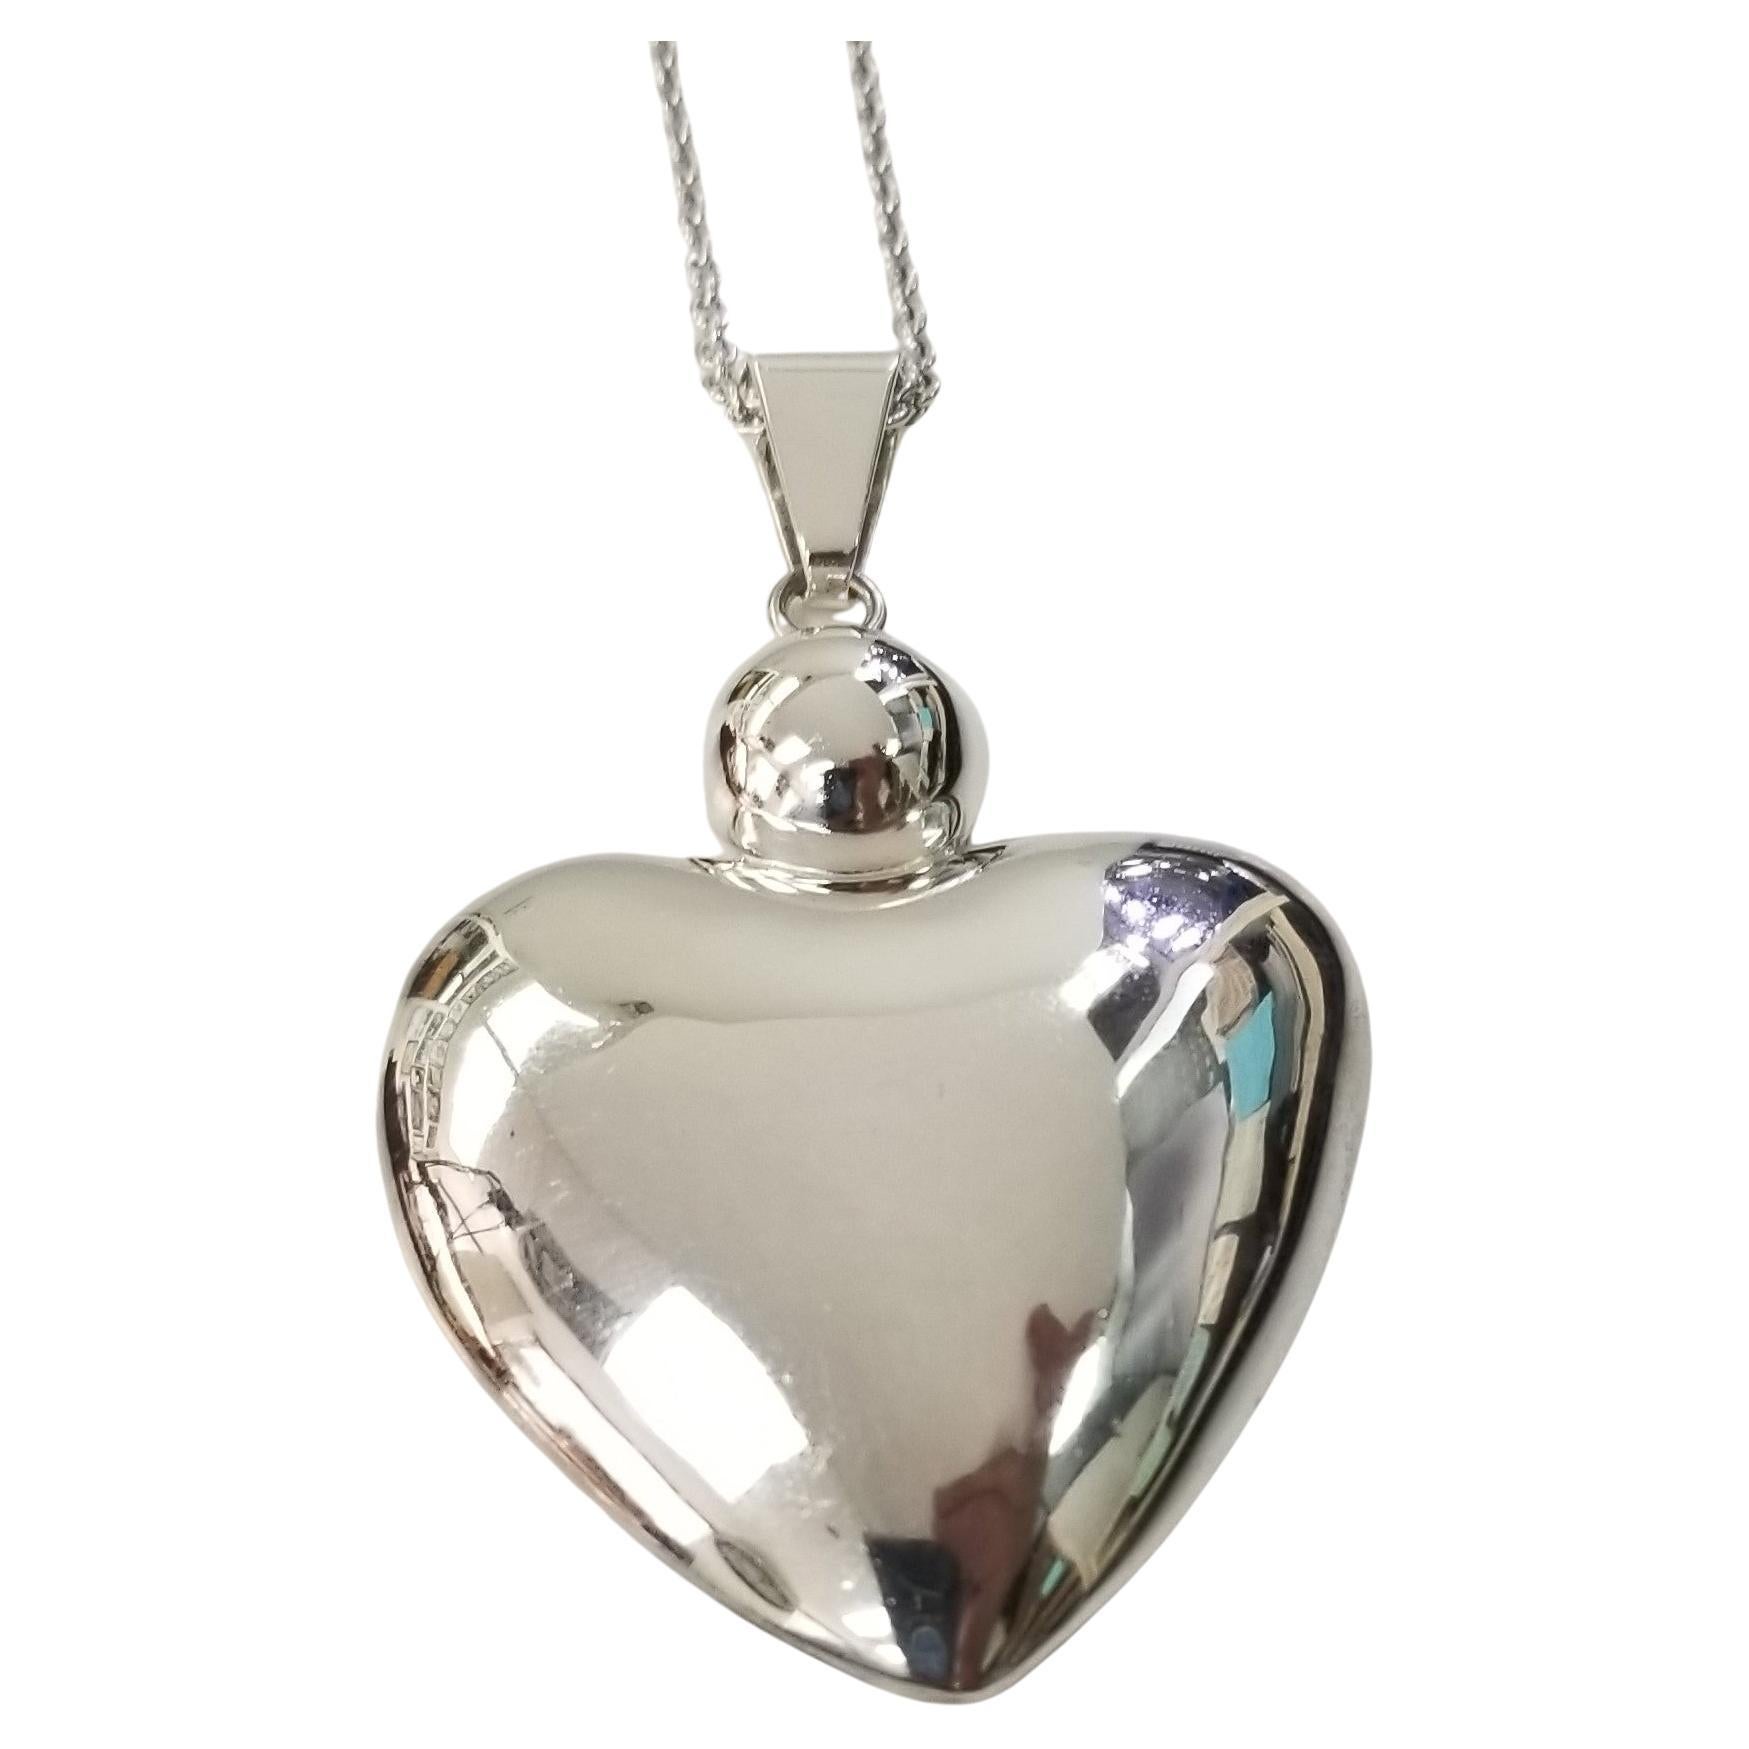 Silver Extra Large Puffed Heart Pendant 2 inch by 2 1/2 inch 46 Grams For Sale